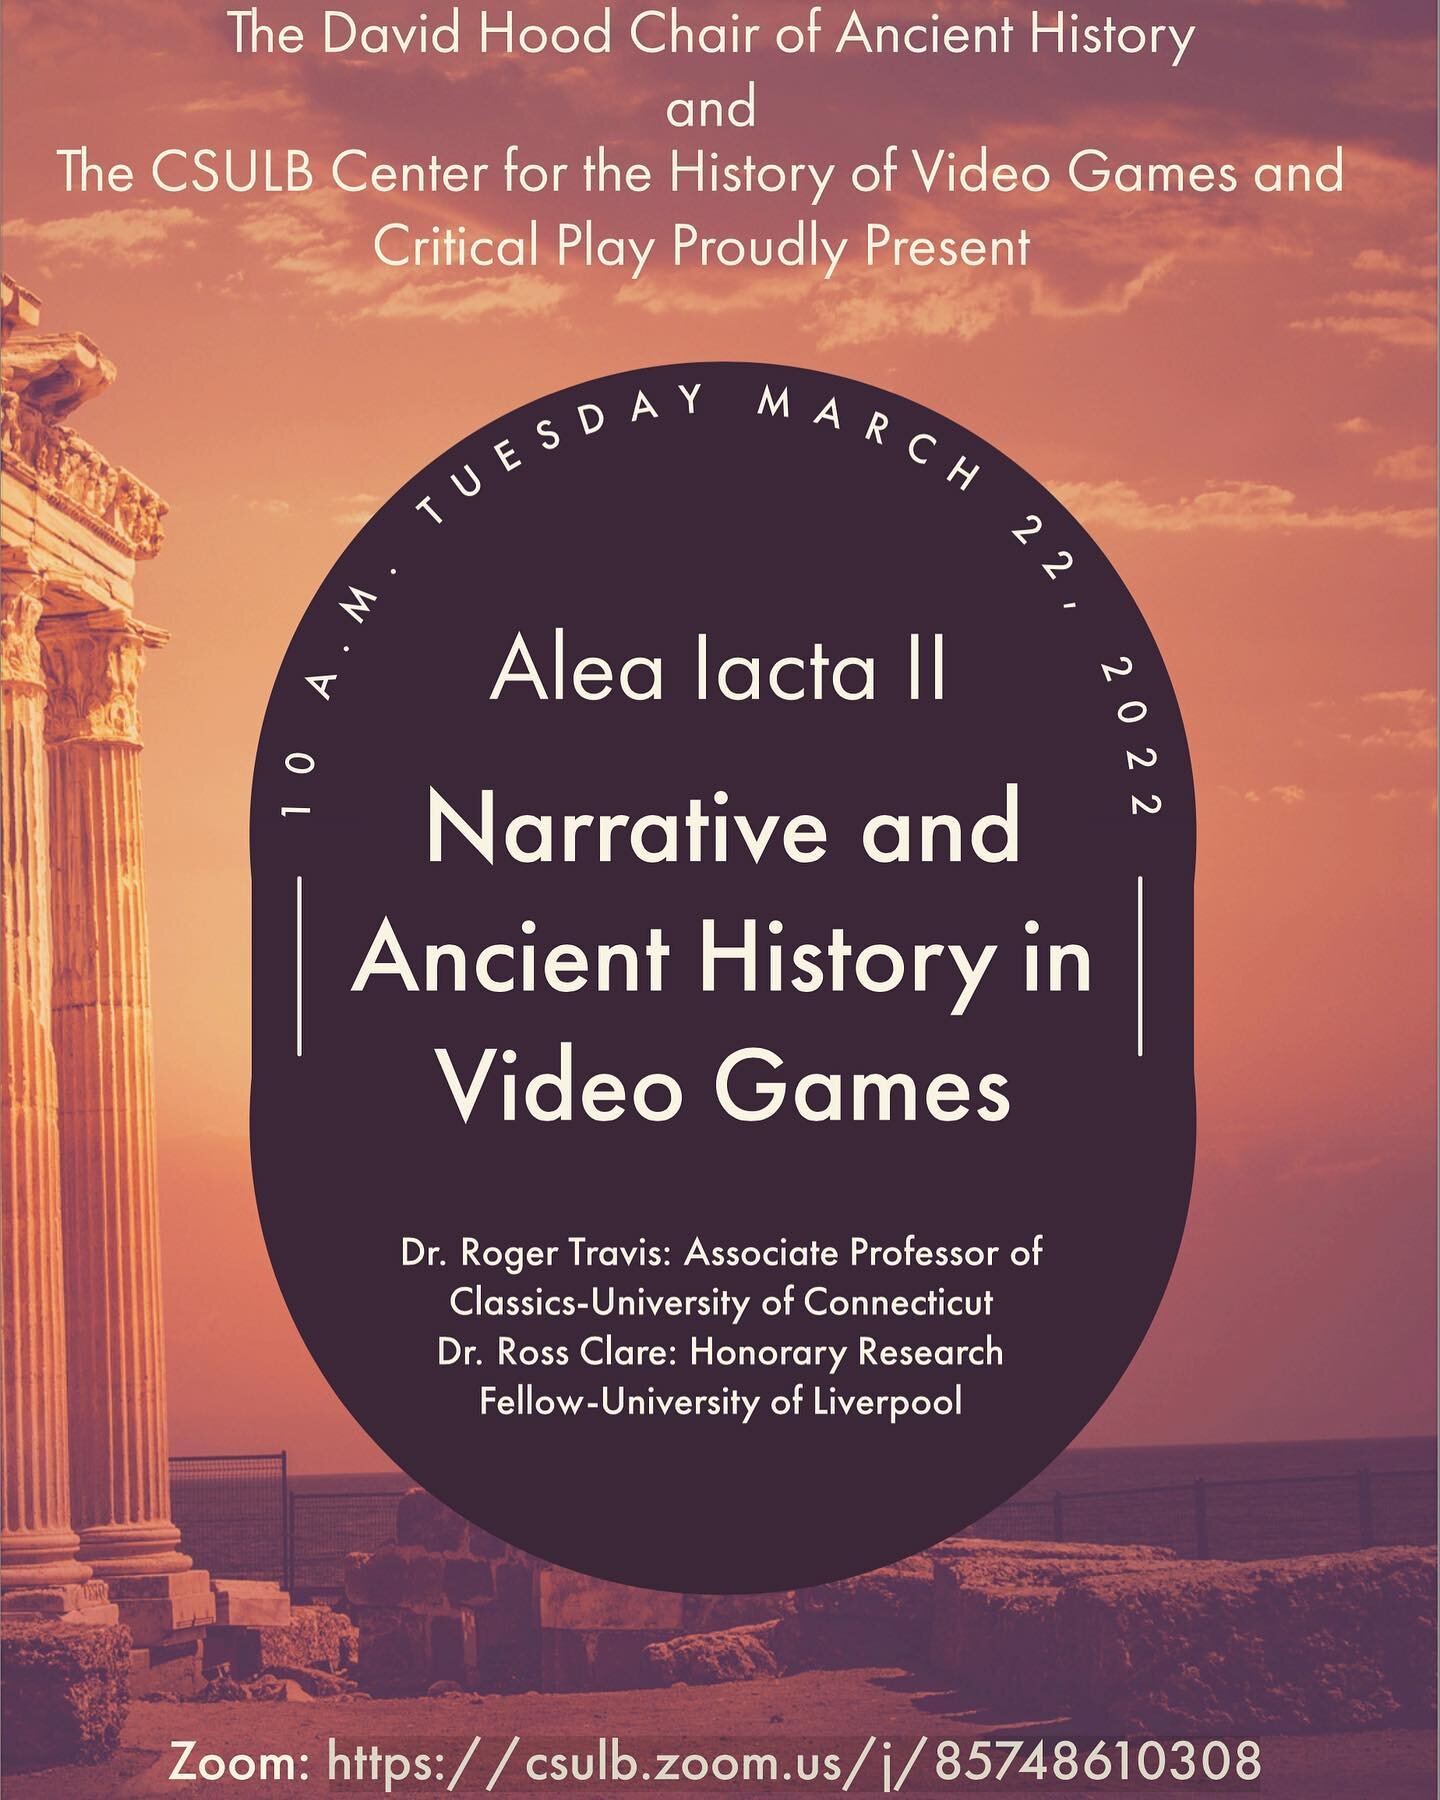 Tuesday 3-22 10am PDT. We are proud to present Alea Iacta II: Narrative and Ancient History in Video Games. All are welcome. @csulbalumni @csulbasi #history #videogames #videogamehistory #ancientworld